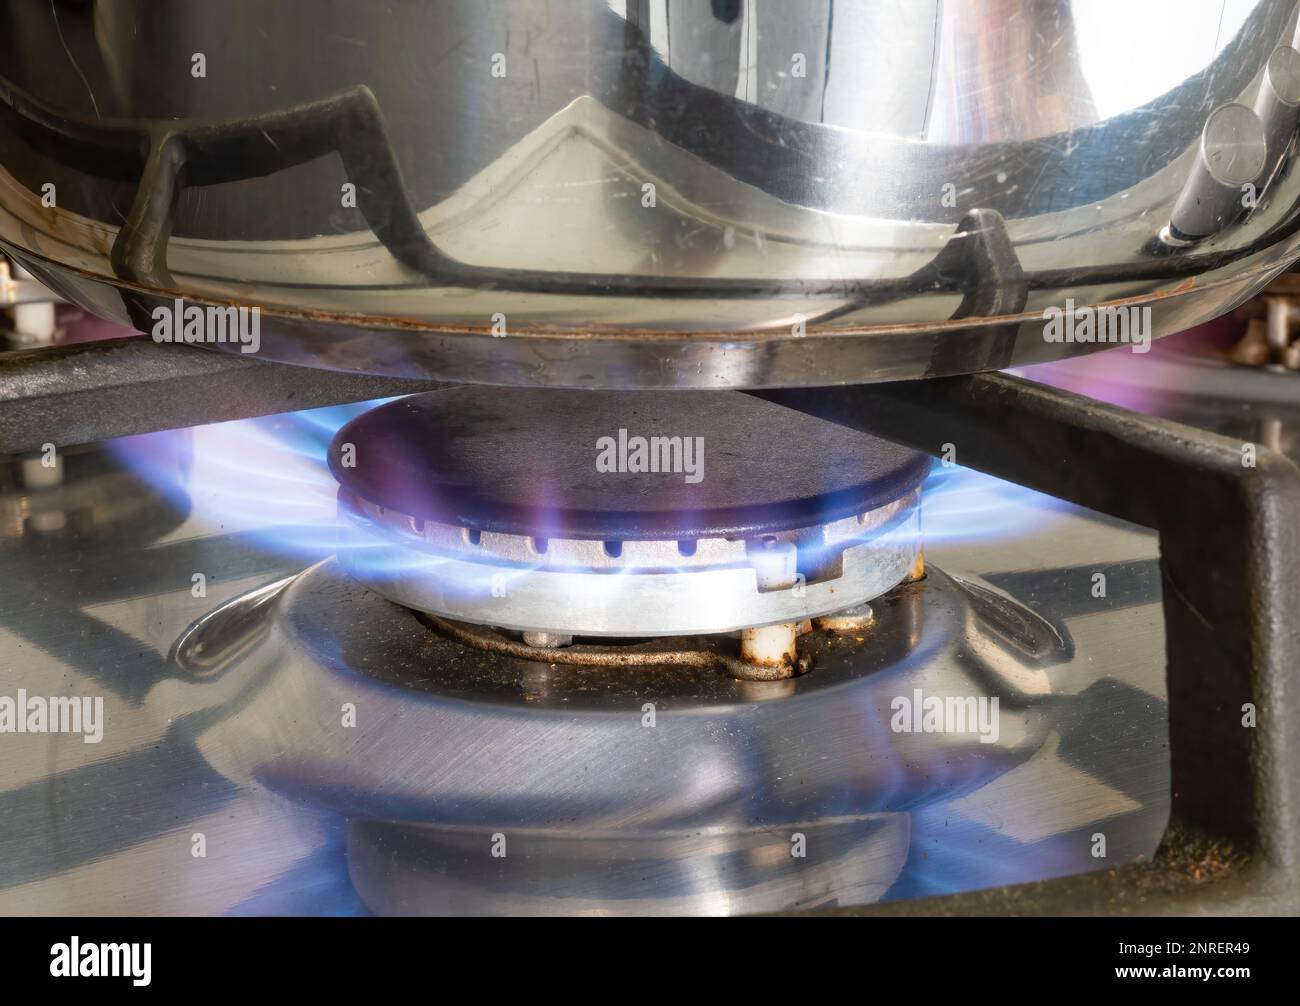 Blue gas jets burning under a steel saucepan on a hob Stock Photo